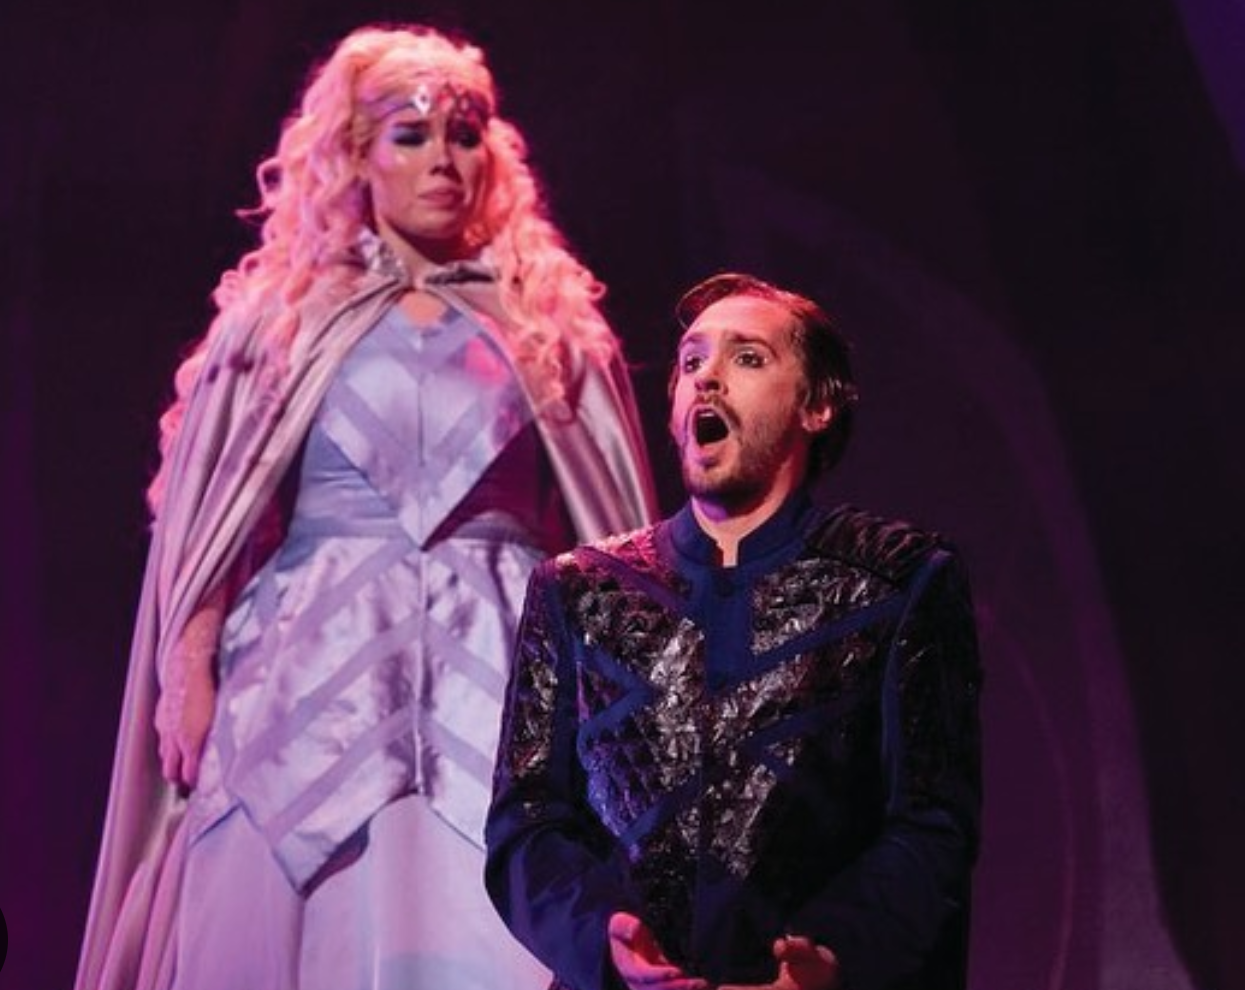 IN REVIEW: soprano CAROLYN ORR as Angelica (left) and tenor DAVID MAIZE as Medoro (right) in A.J. Fletcher Opera Institute's February 2023 production of Franz Joseph Haydn's ORLANDO PALADINO [Photograph by Allison Lee Isley, © by A.J. Fletcher Opera Institute/University of North Carolina School of the Arts]